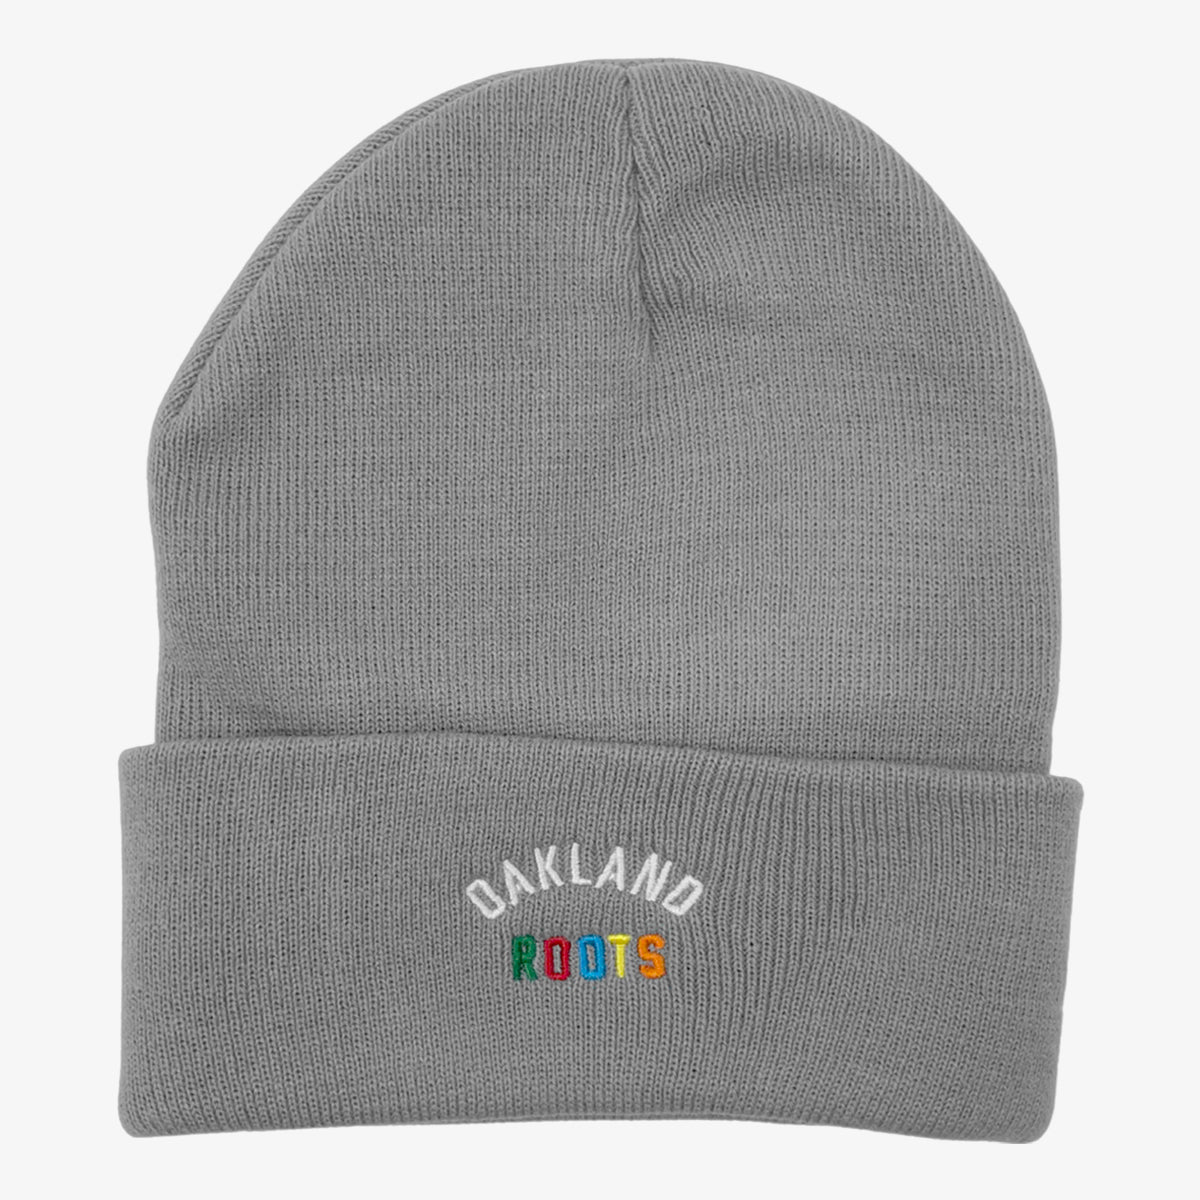 Dark grey cuffed beanie with full-color Roots SC wordmark in front middle of the cuff.